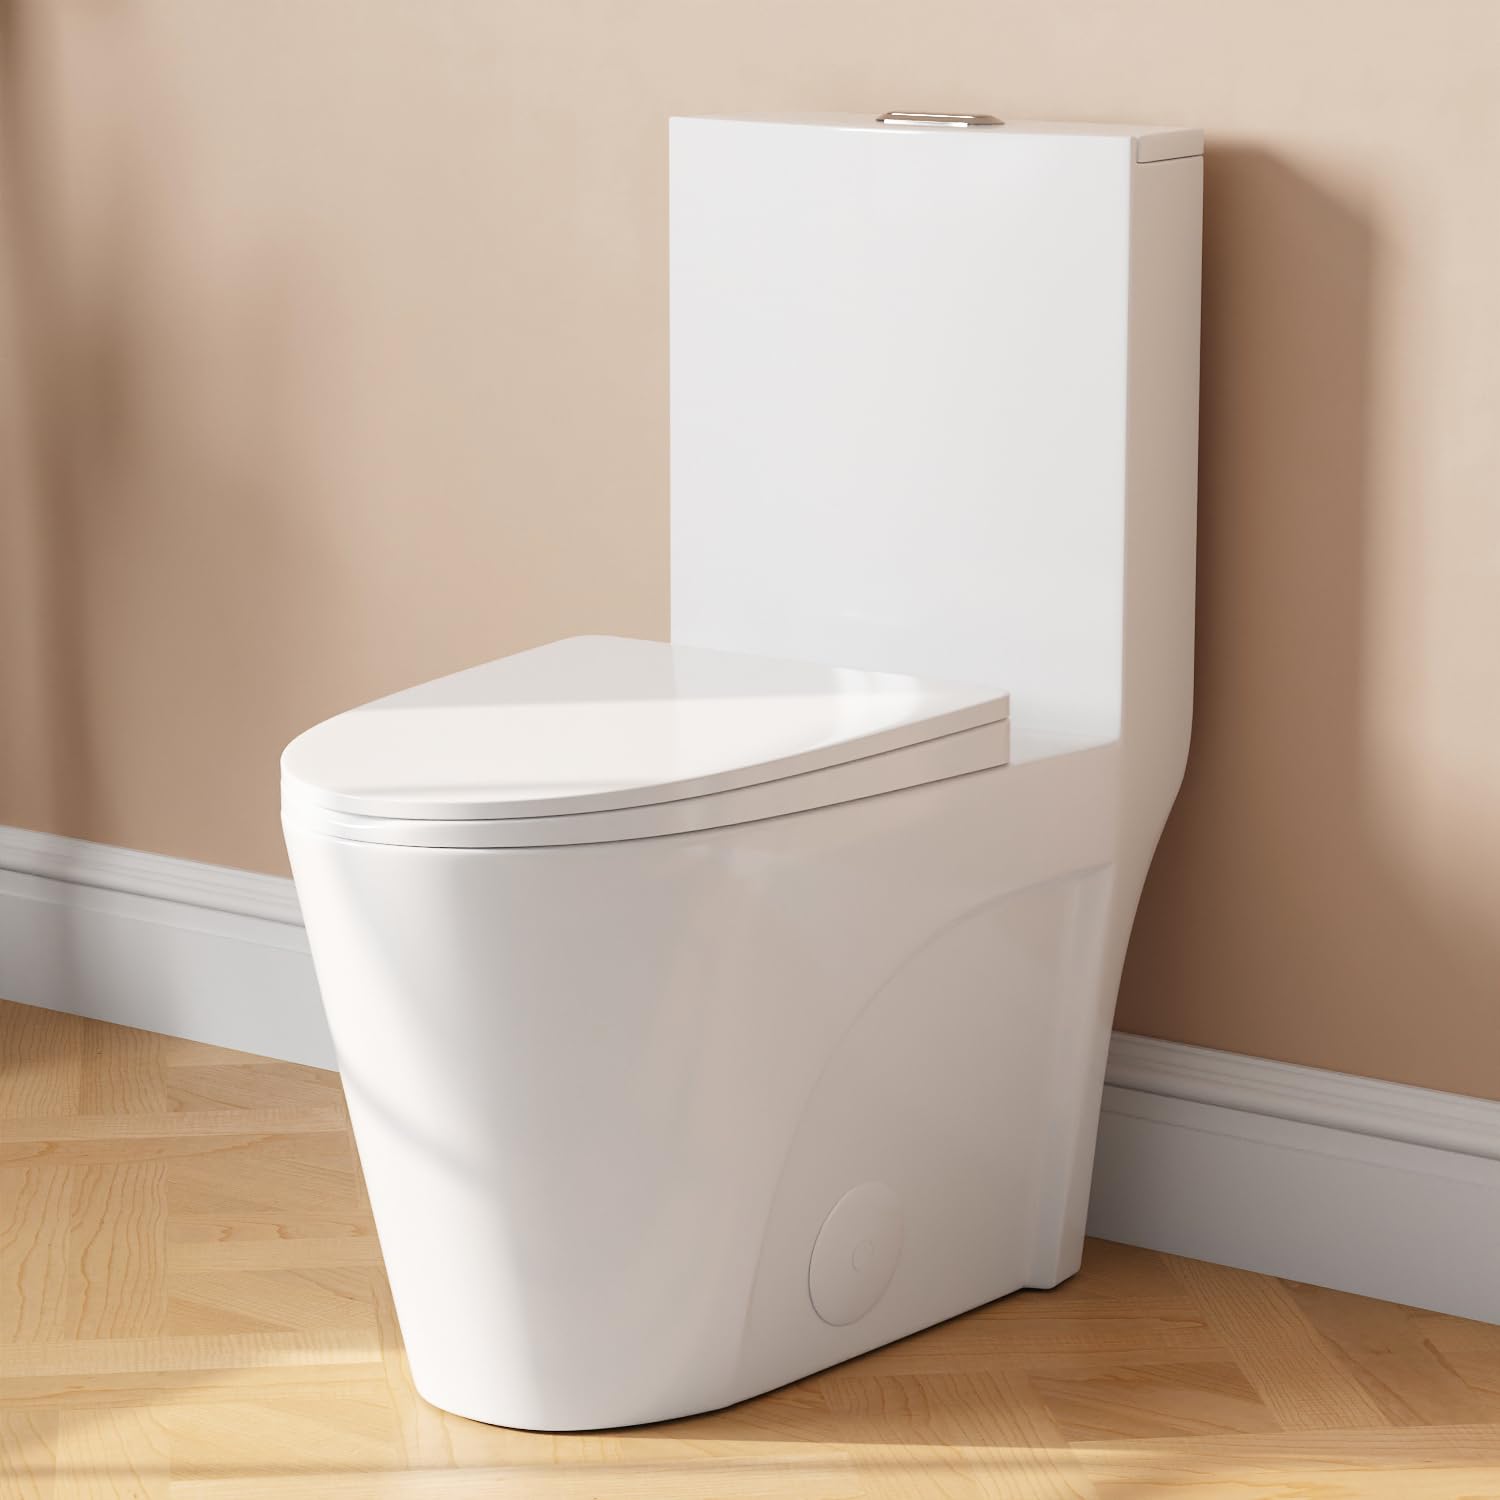 DeerValley Toilet, Elongated One Piece Toilet for Bathrooms, Comfortable Chair Seat Height 17